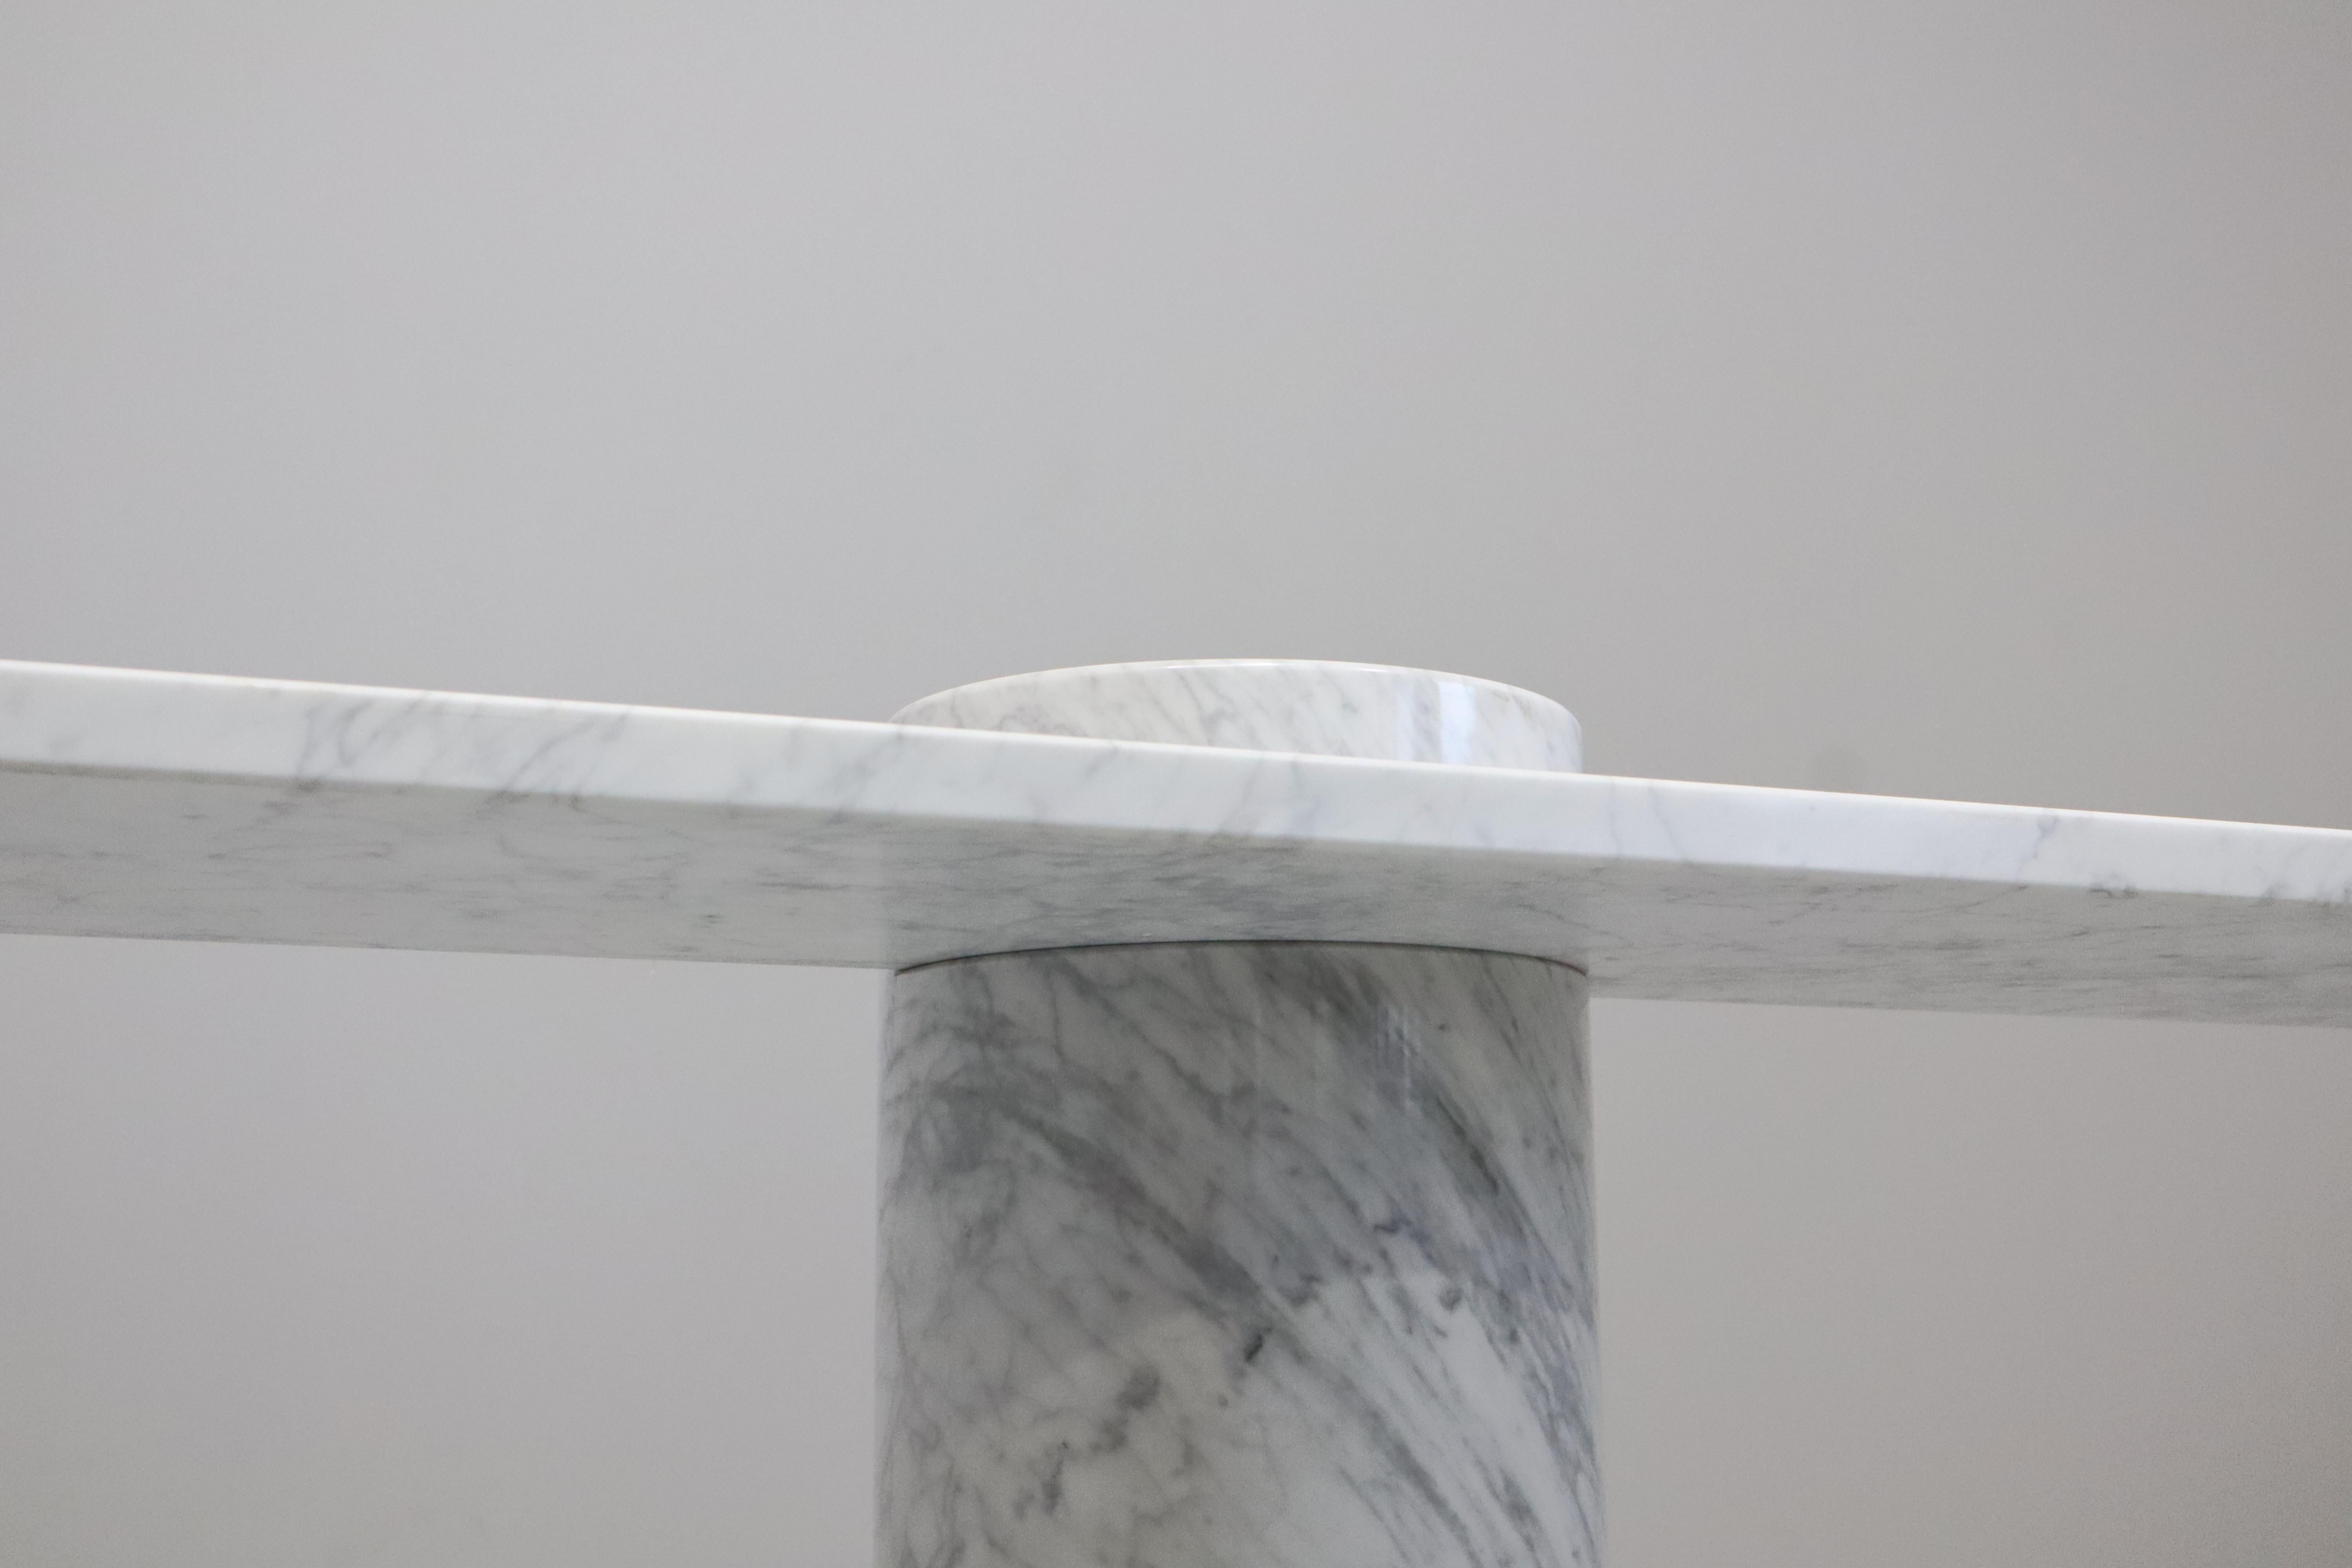 Angelo Mangiarotti white Carrara marble Loico collection for Skipper console. Rare model and not in current production. c1980
Mark Emery, Furniture by Architects, New York, 1983, p. 193 for similar examples; Giuliana Gramigna and Paola Biondi, Il